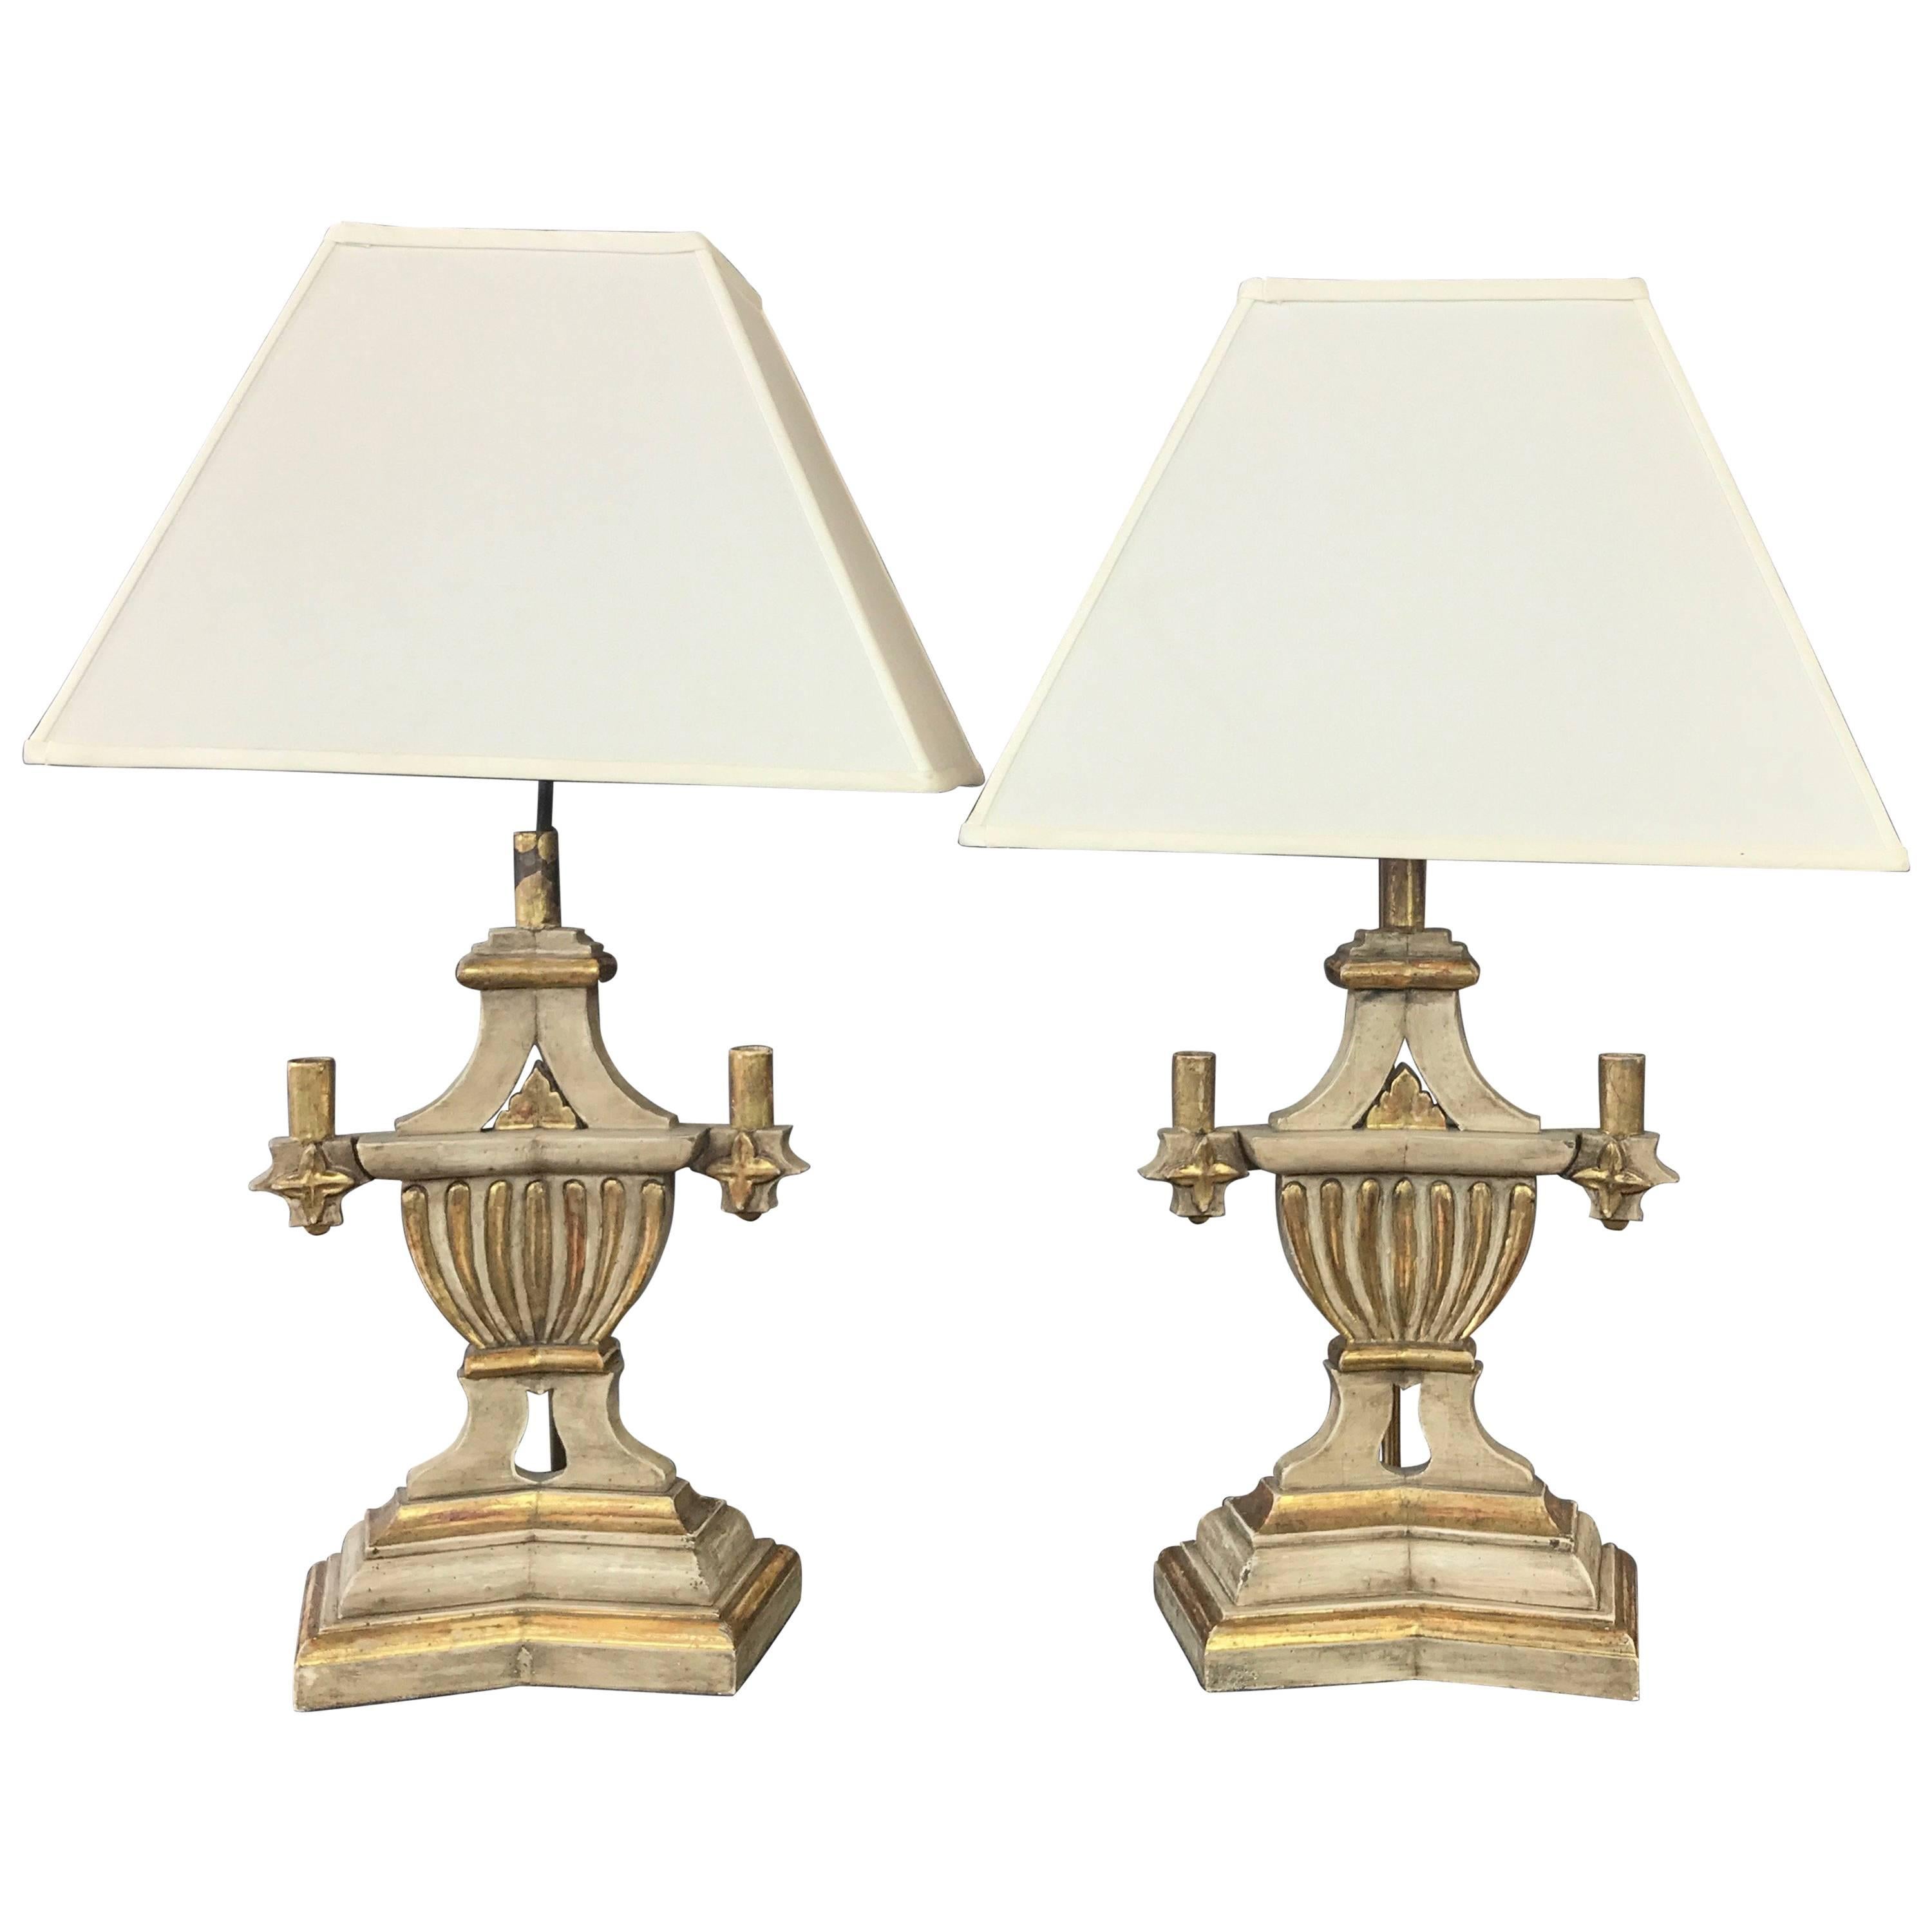 Pair of 1930s Italian Neoclassical Parcel-Gilt Candleholder Table Lamps